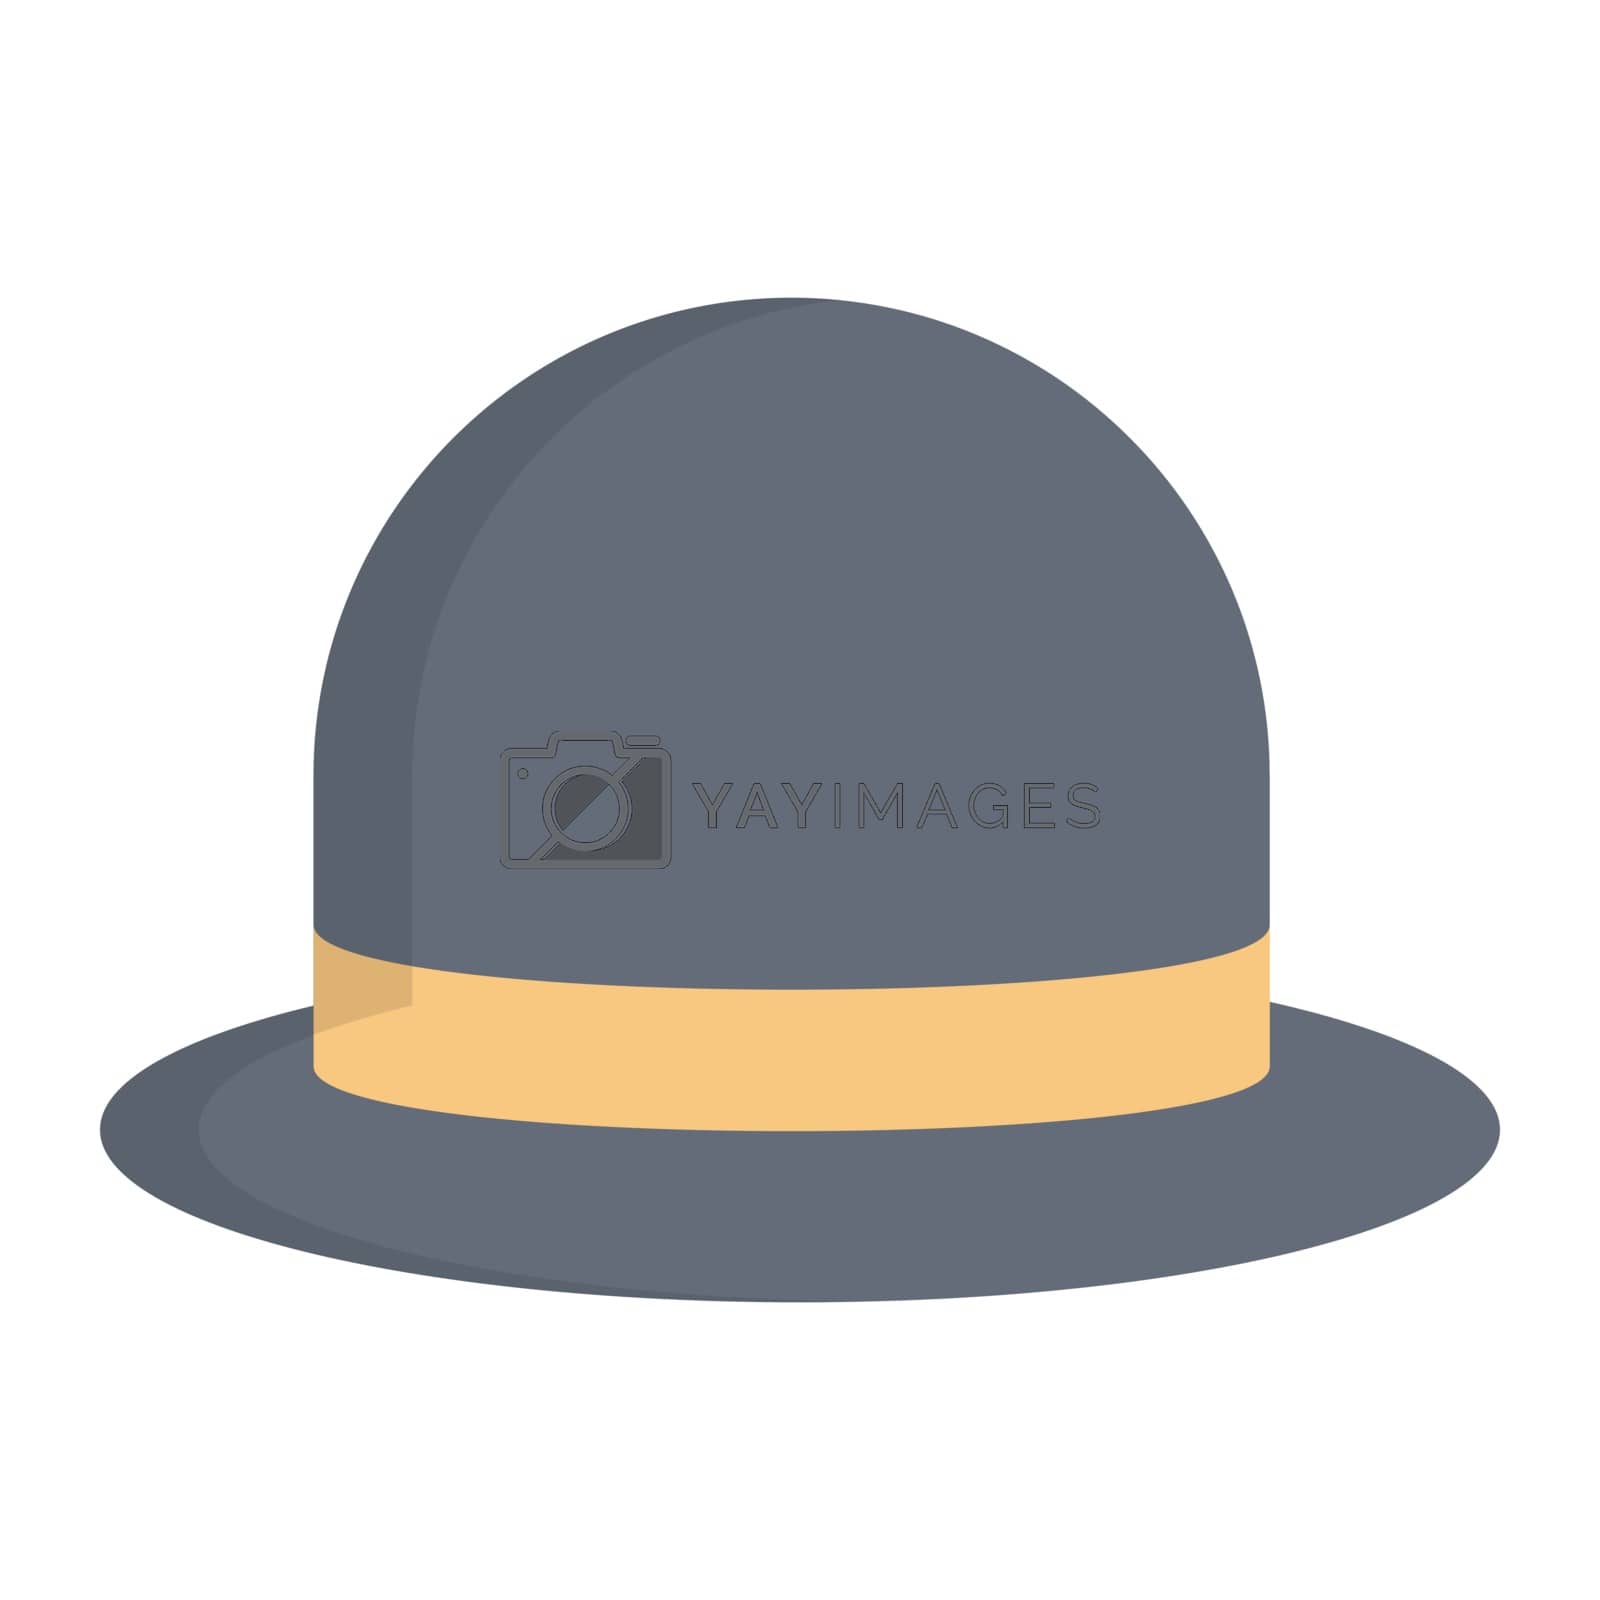 Royalty free image of cap by vectorstall